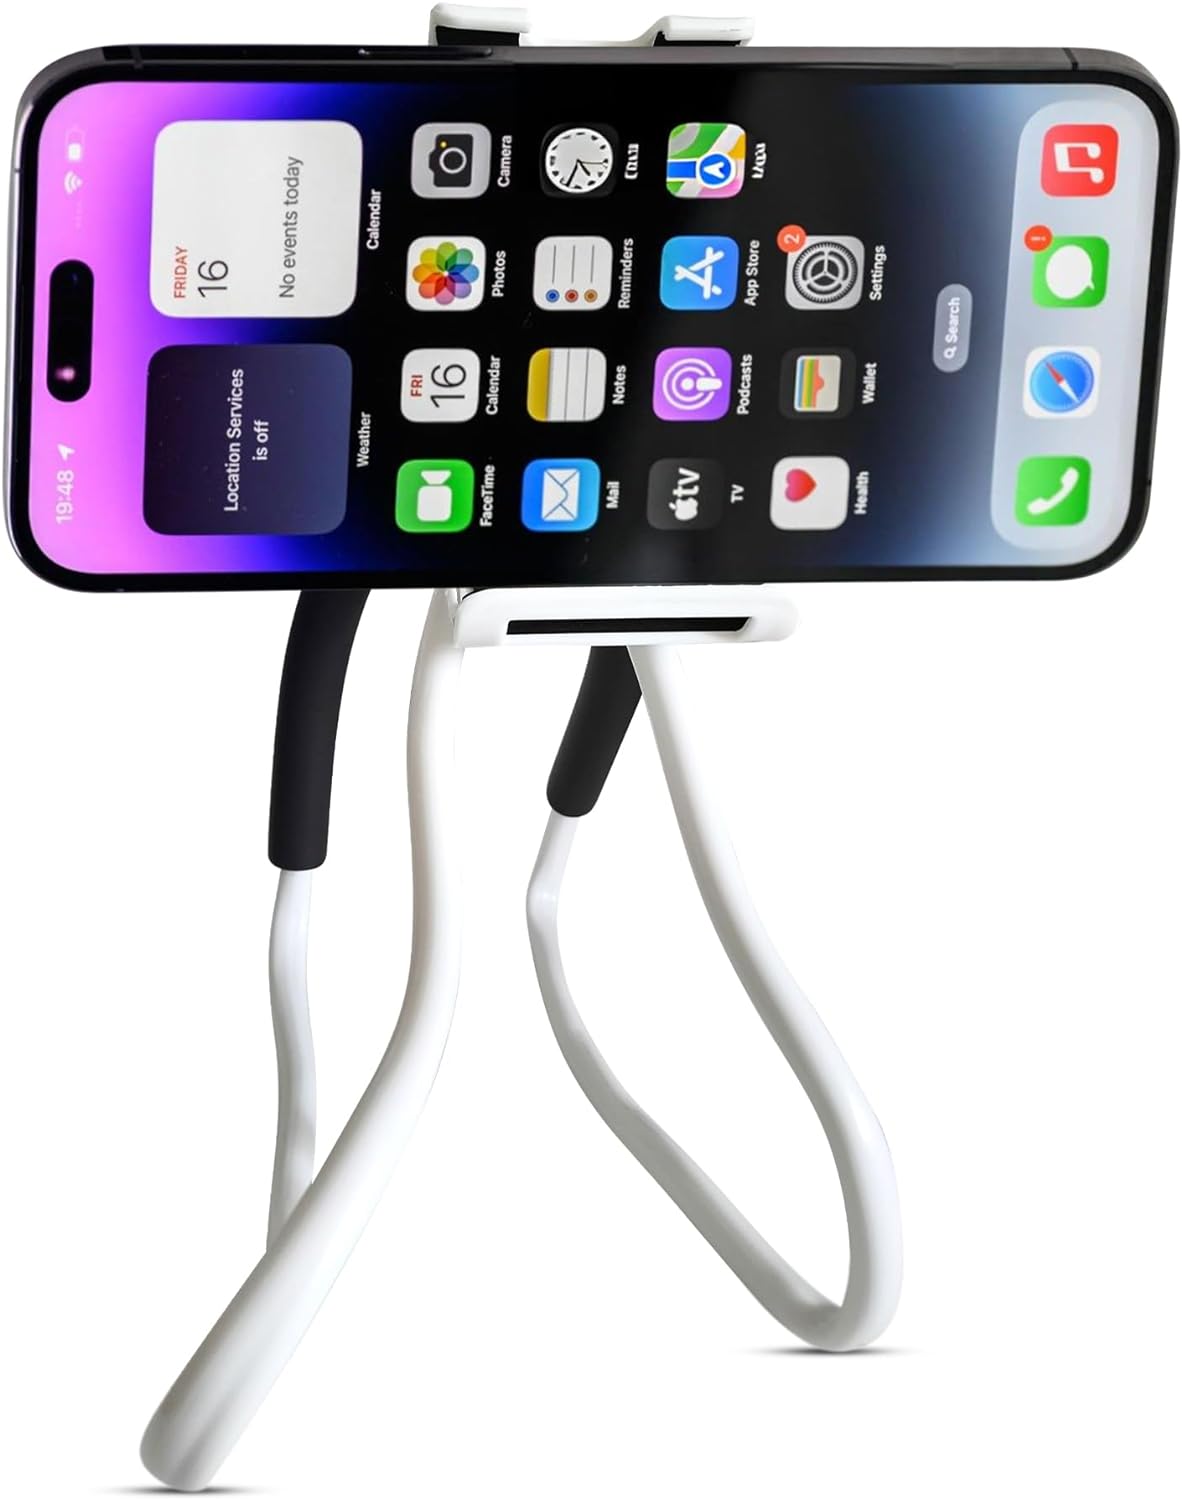 Phone Holder The Ultimate Foldable Multi - Purpose Mobile Phone Holder for Desk, Neck, Car, Bike, and Selfies. - Amazing Gadgets Outlet